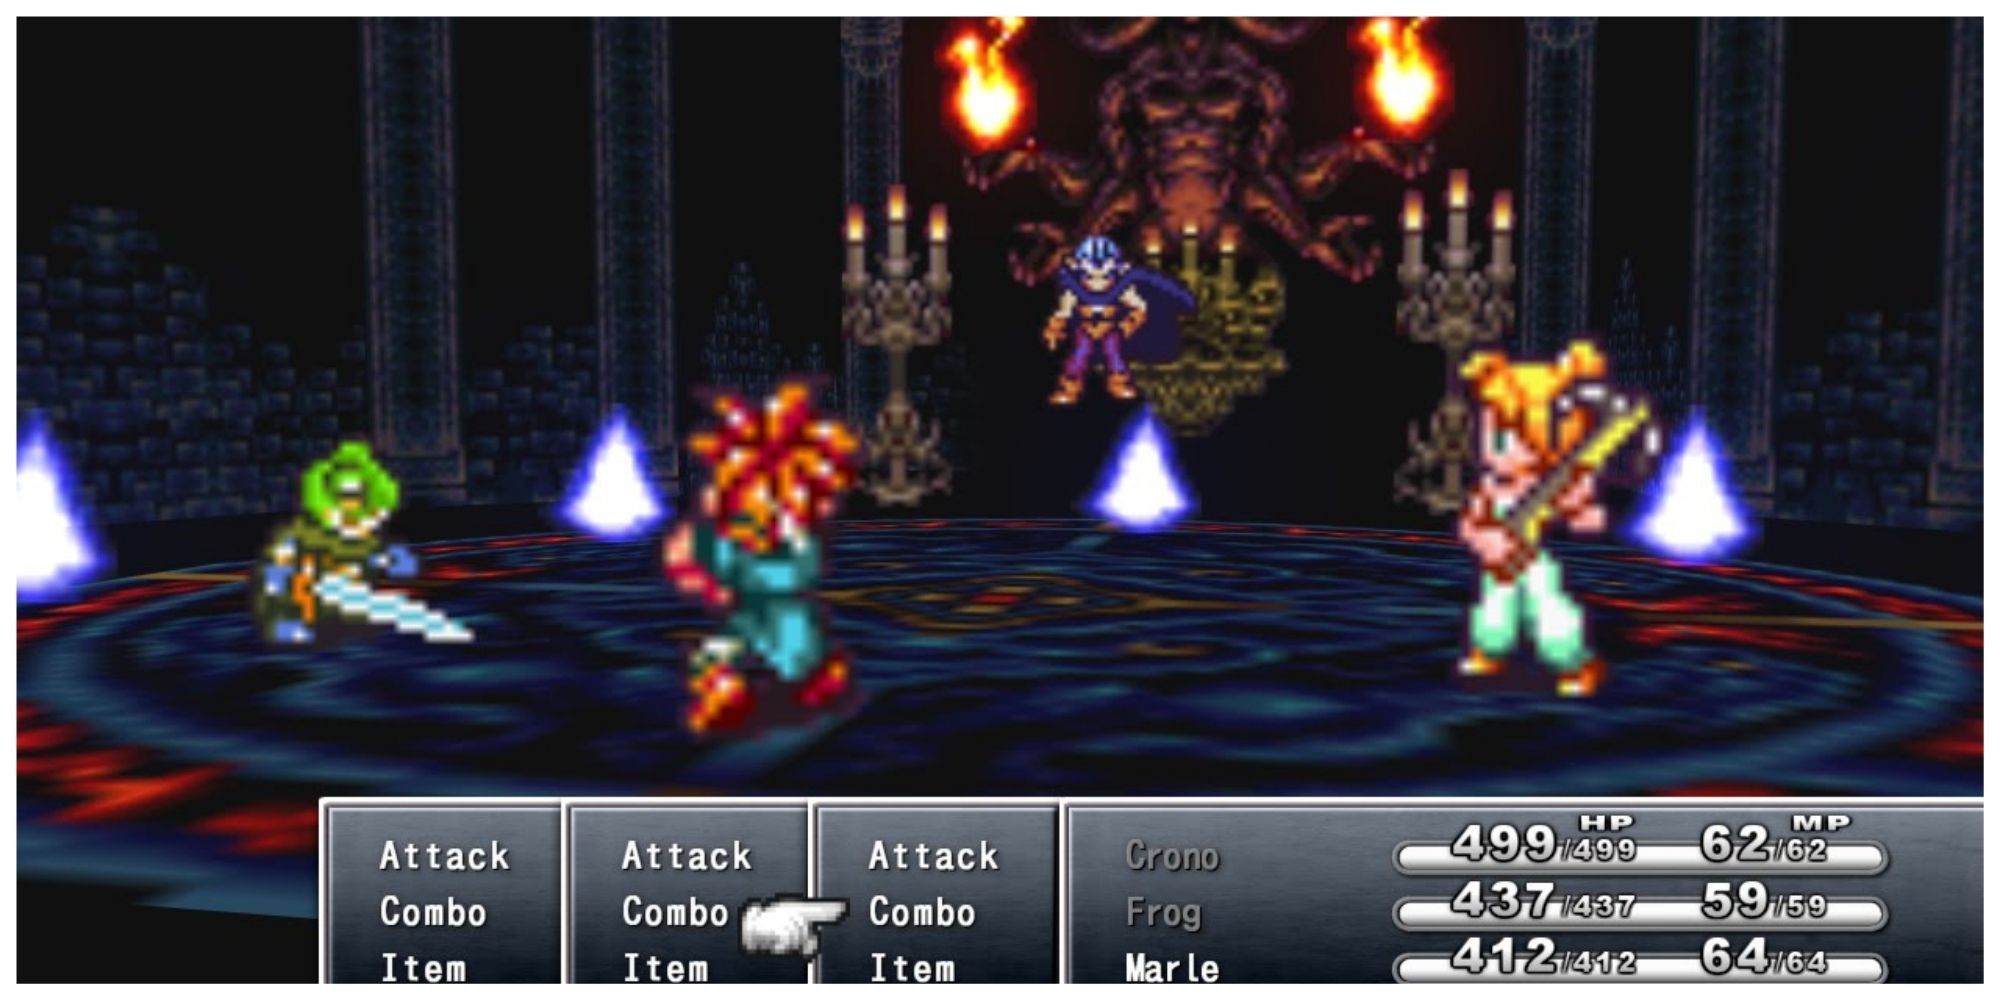 Magus with Crono and crew going to battle at his lair